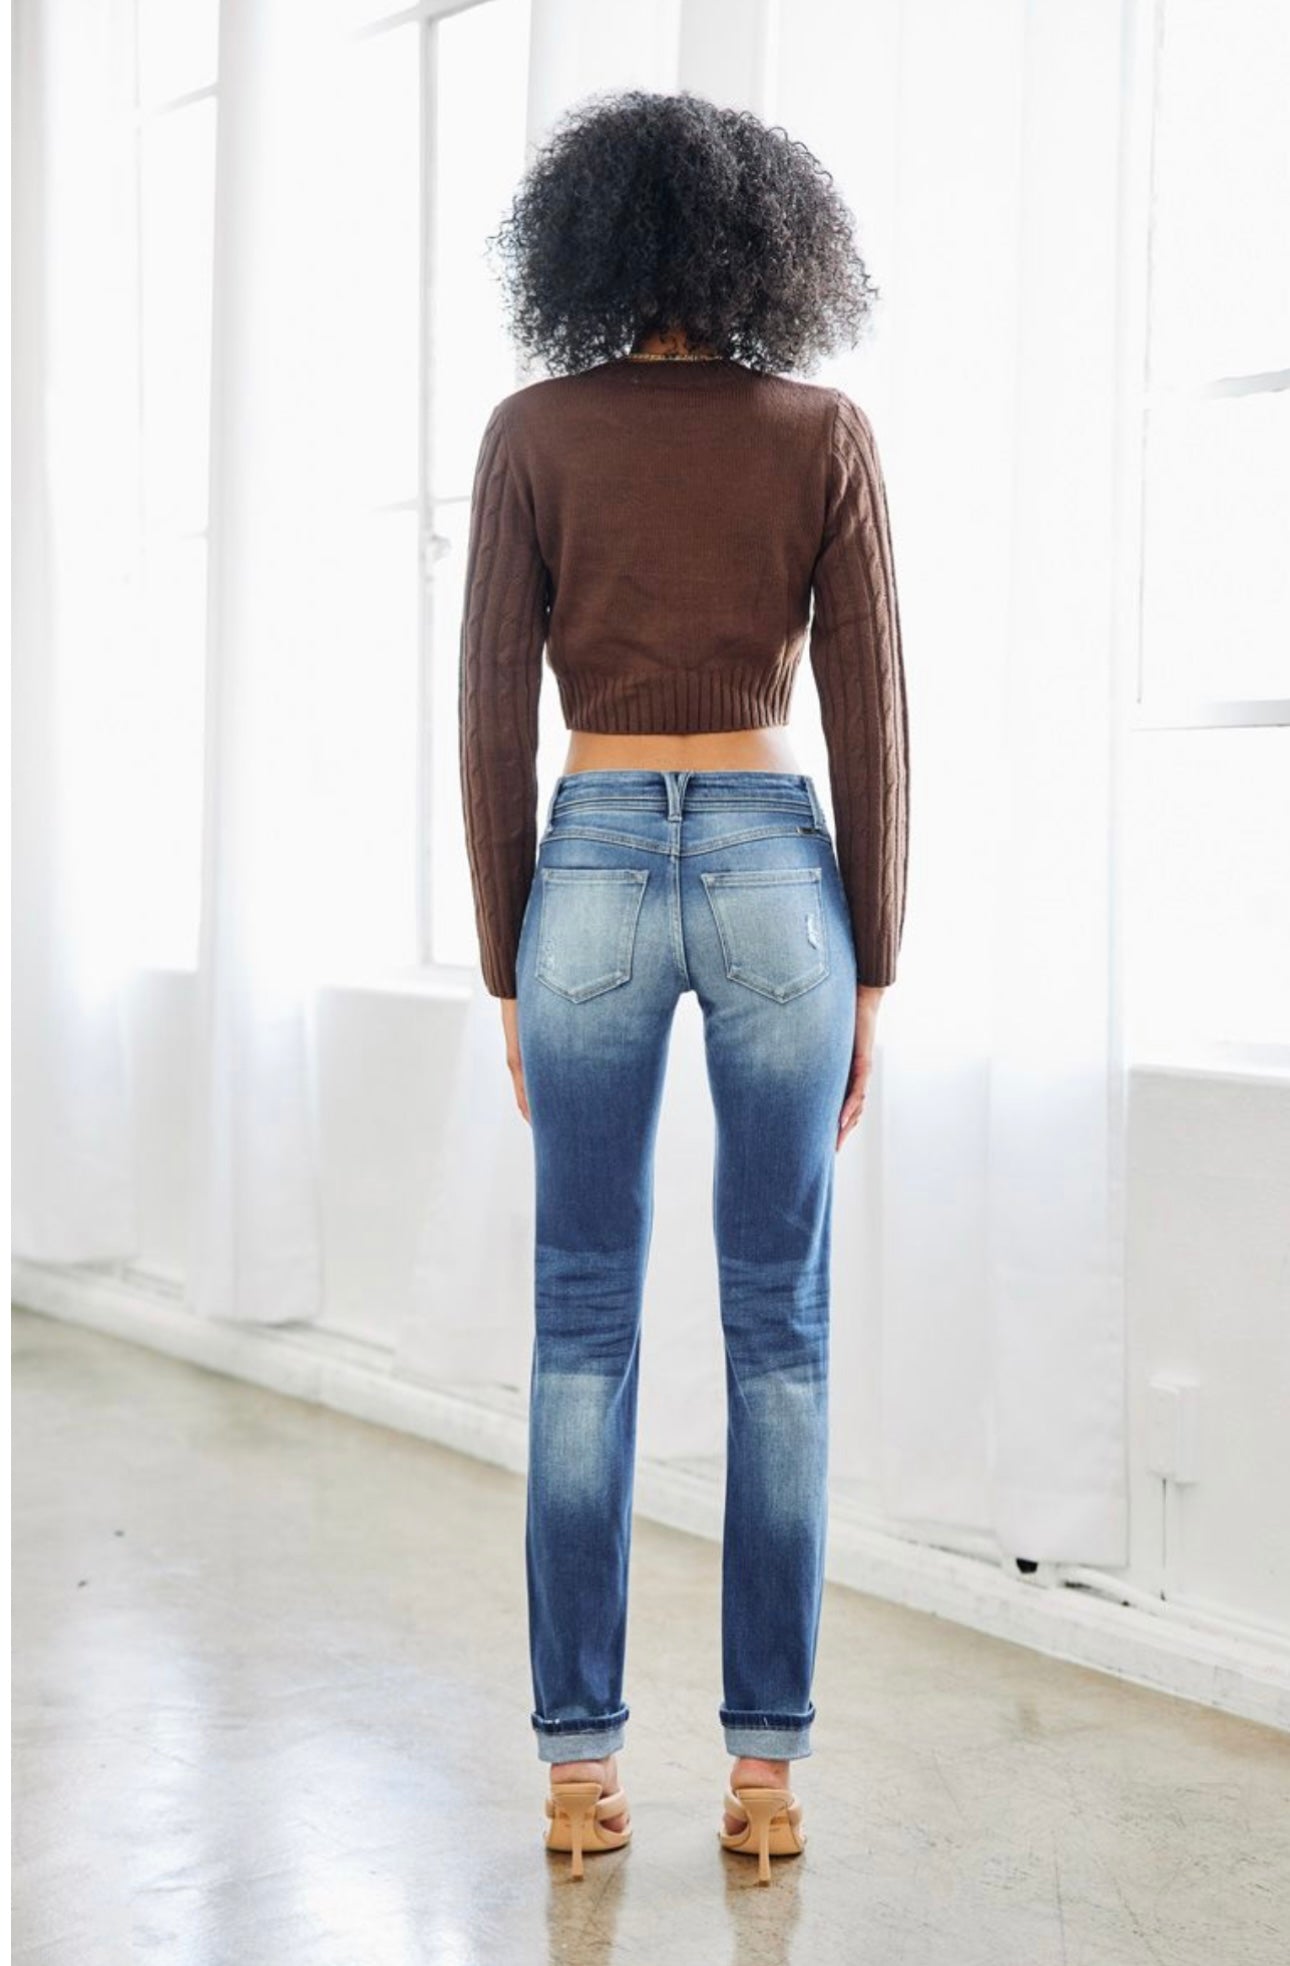 Avery Jeans